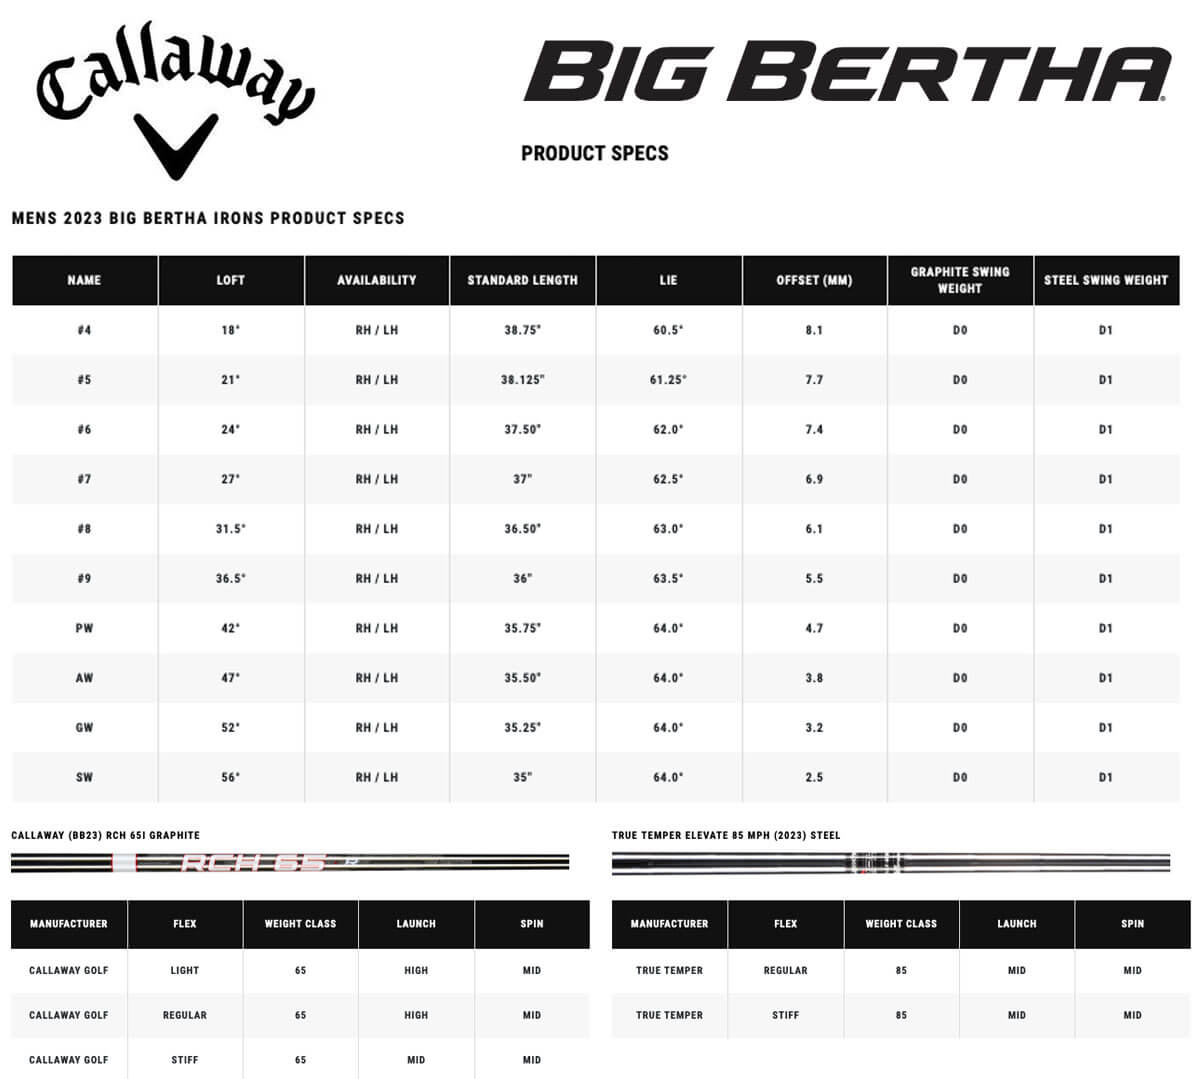 Specification for Callaway Big Bertha Golf Irons - Graphite